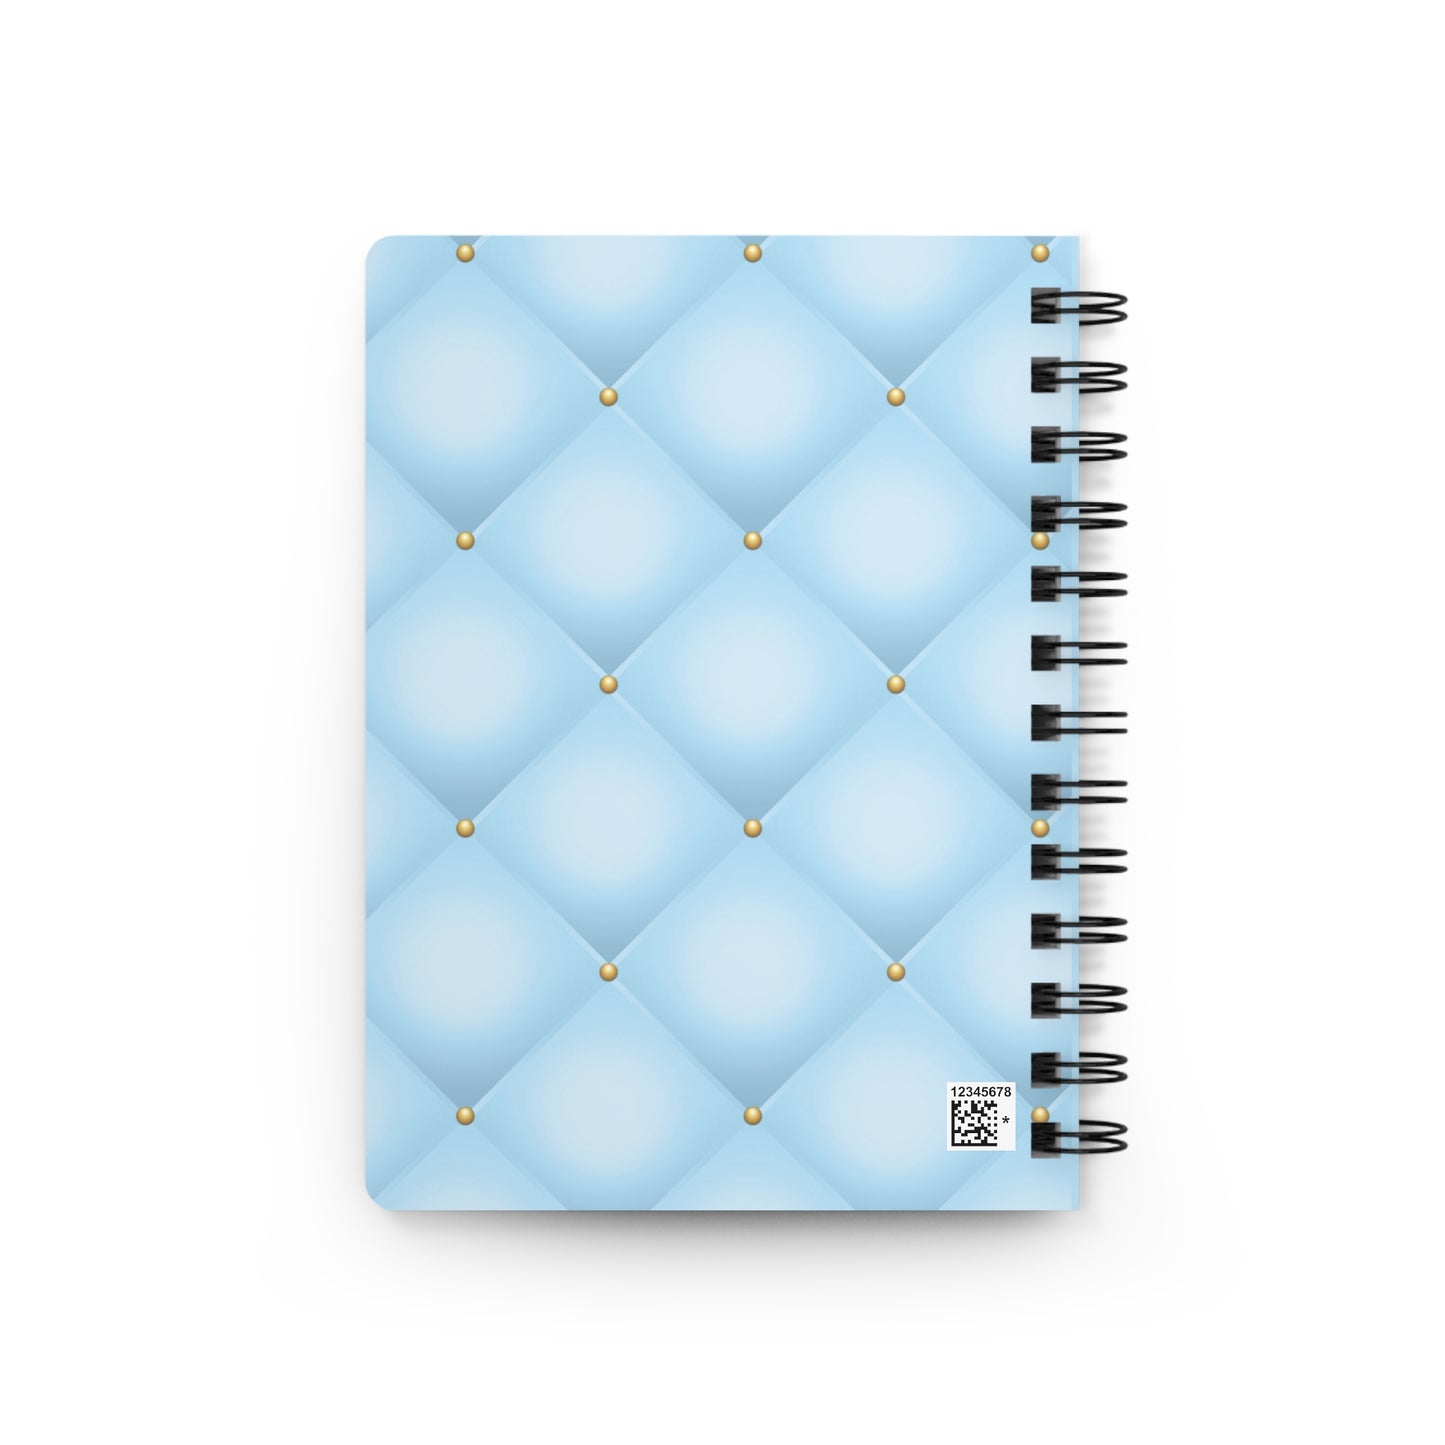 Stop for one minute Tufted Print Light Grayish Blue and Gold Spiral Bound Journal